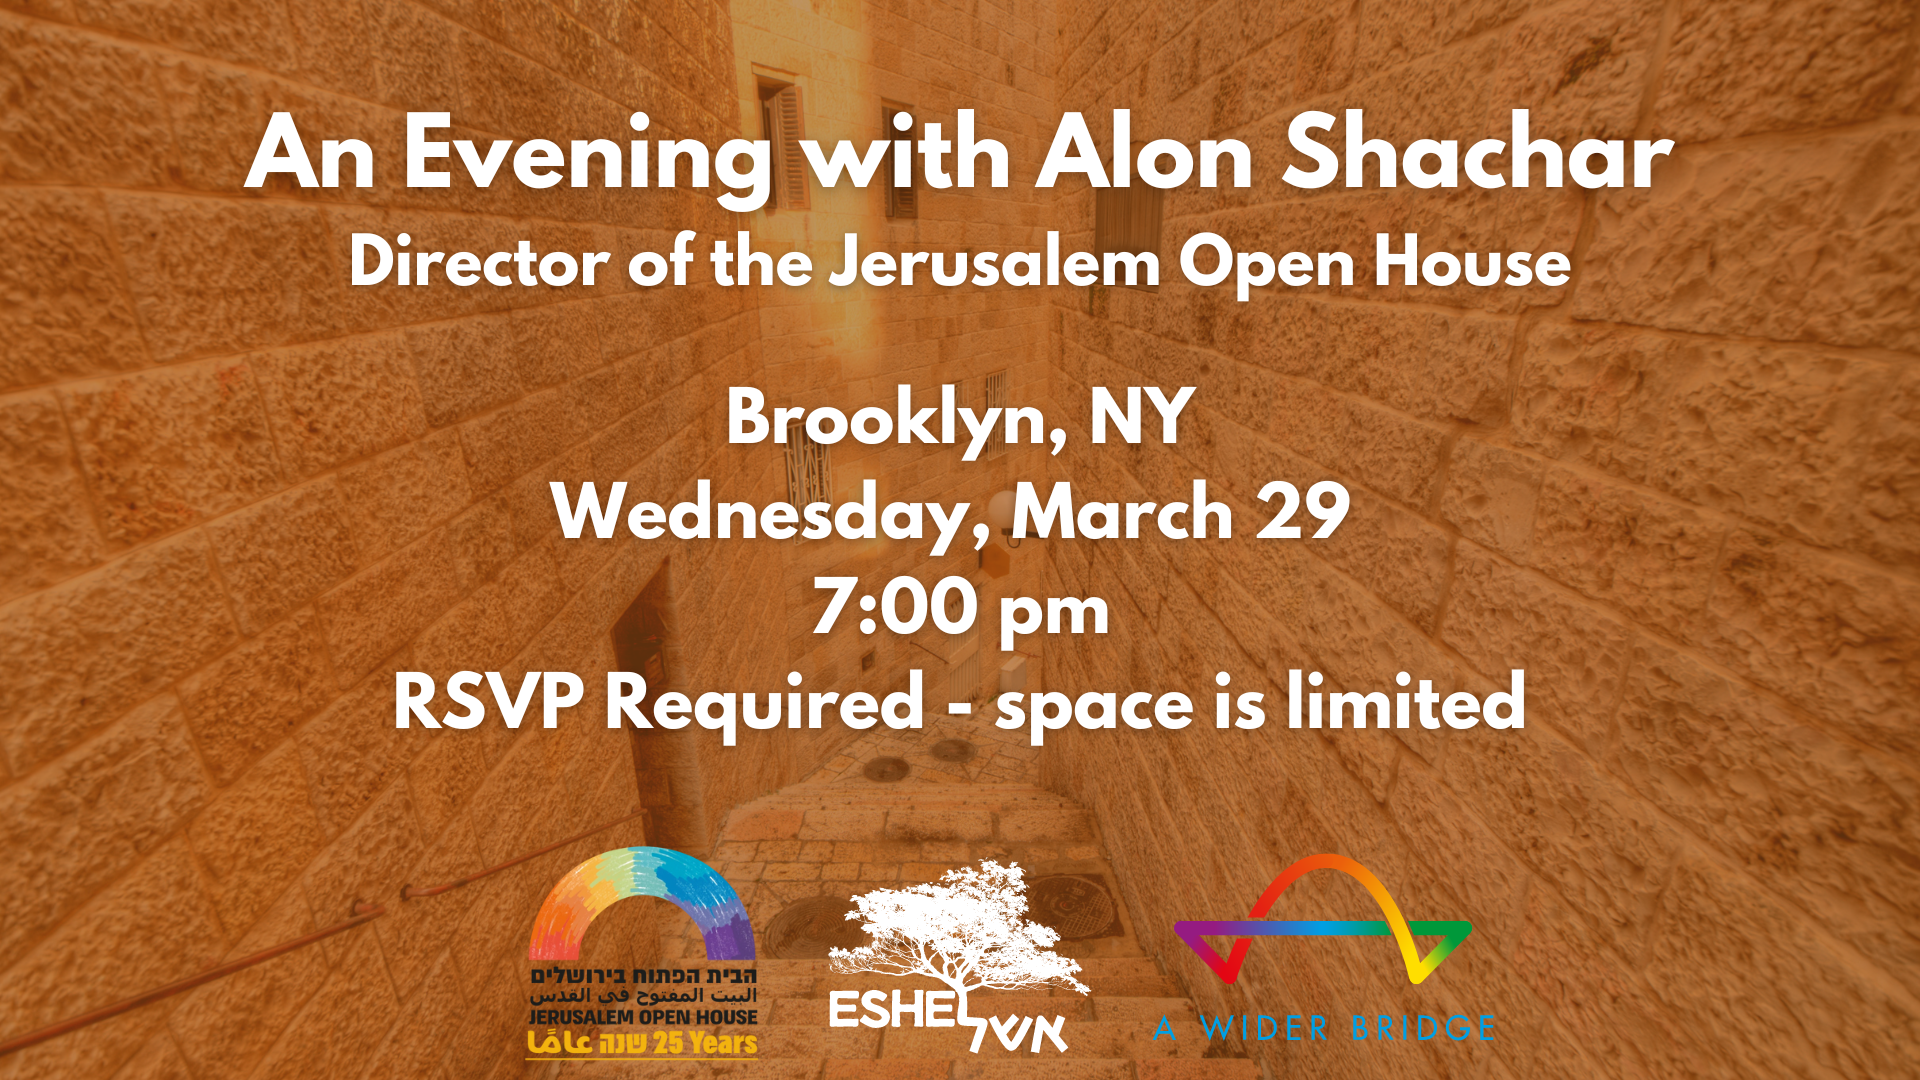 An Evening with Alon Shachar, Director of the Jerusalem Open House | Brooklyn, NY, Wednesday, March 9 at 7:00 pm | RSVP Required - space is limited